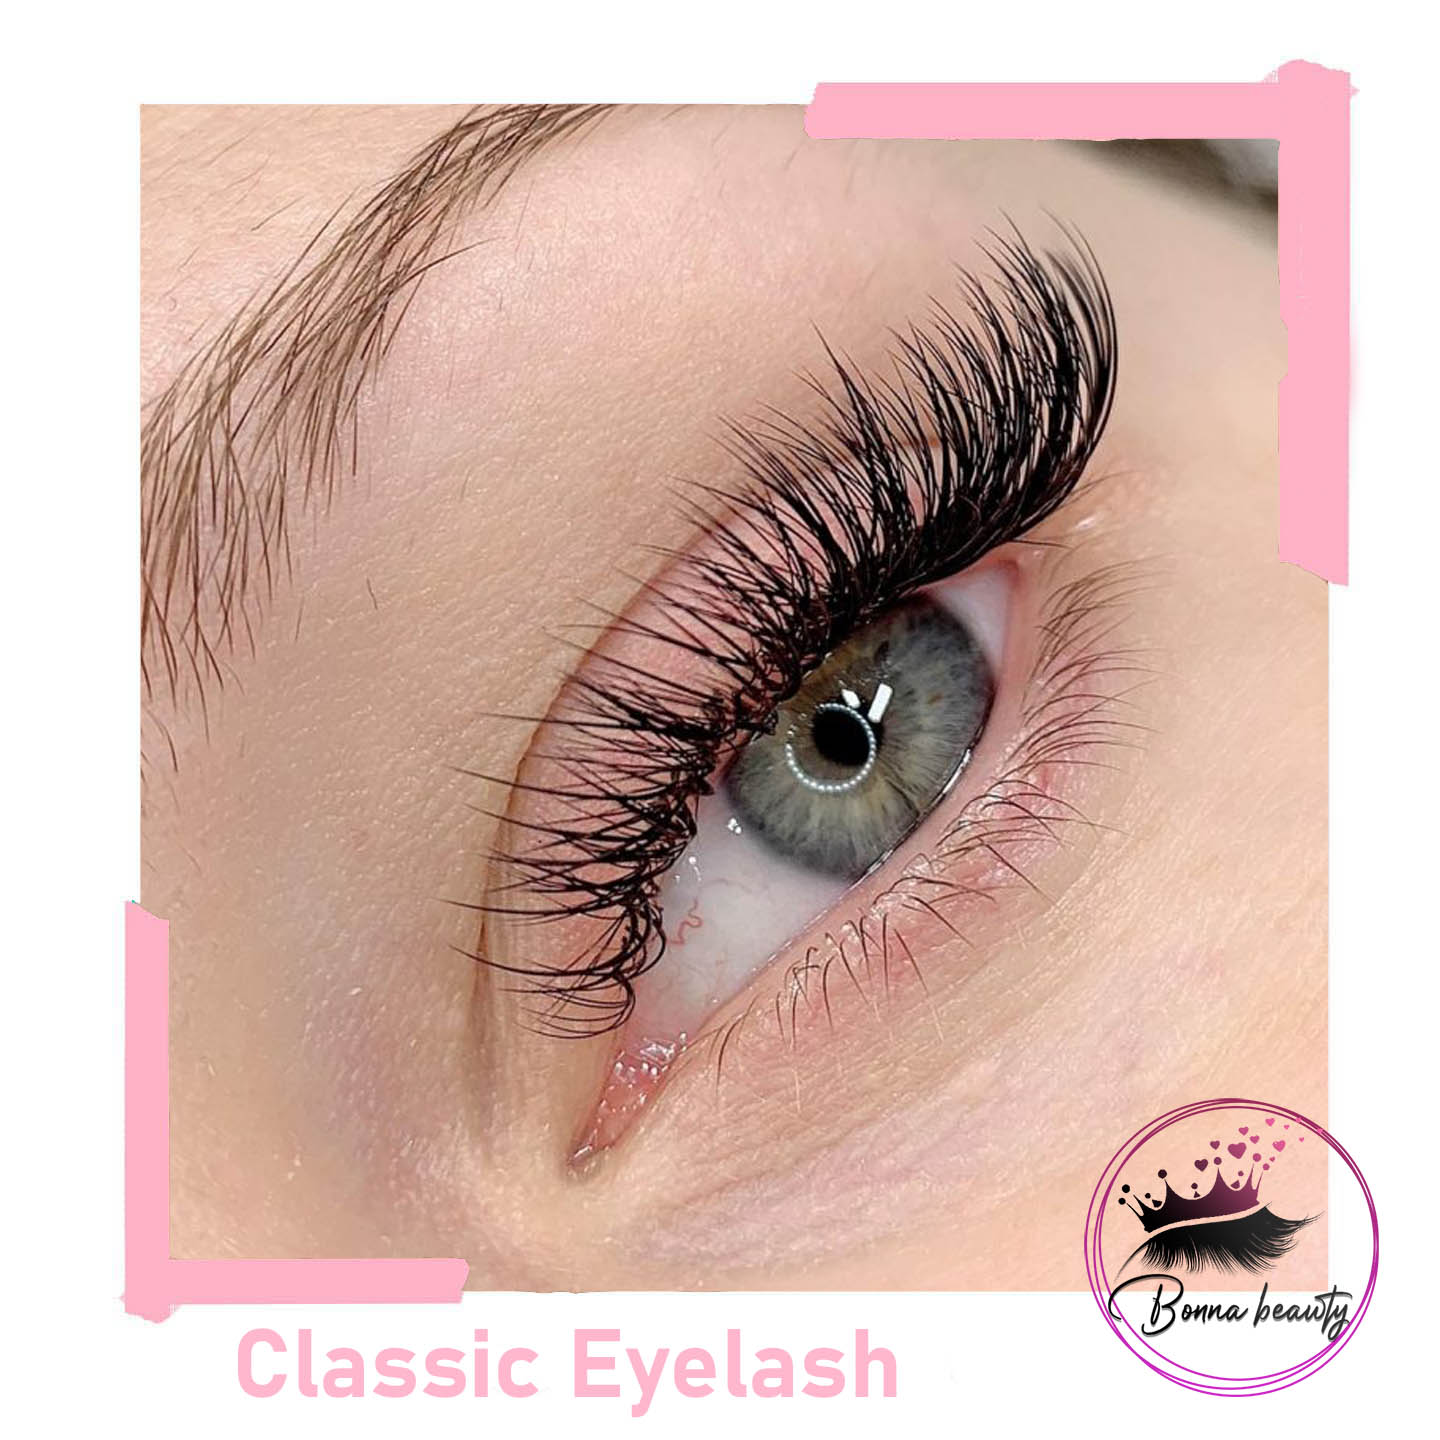 classic eyelash extension in Bankstown Sydney 5 Condell Park Condell Park